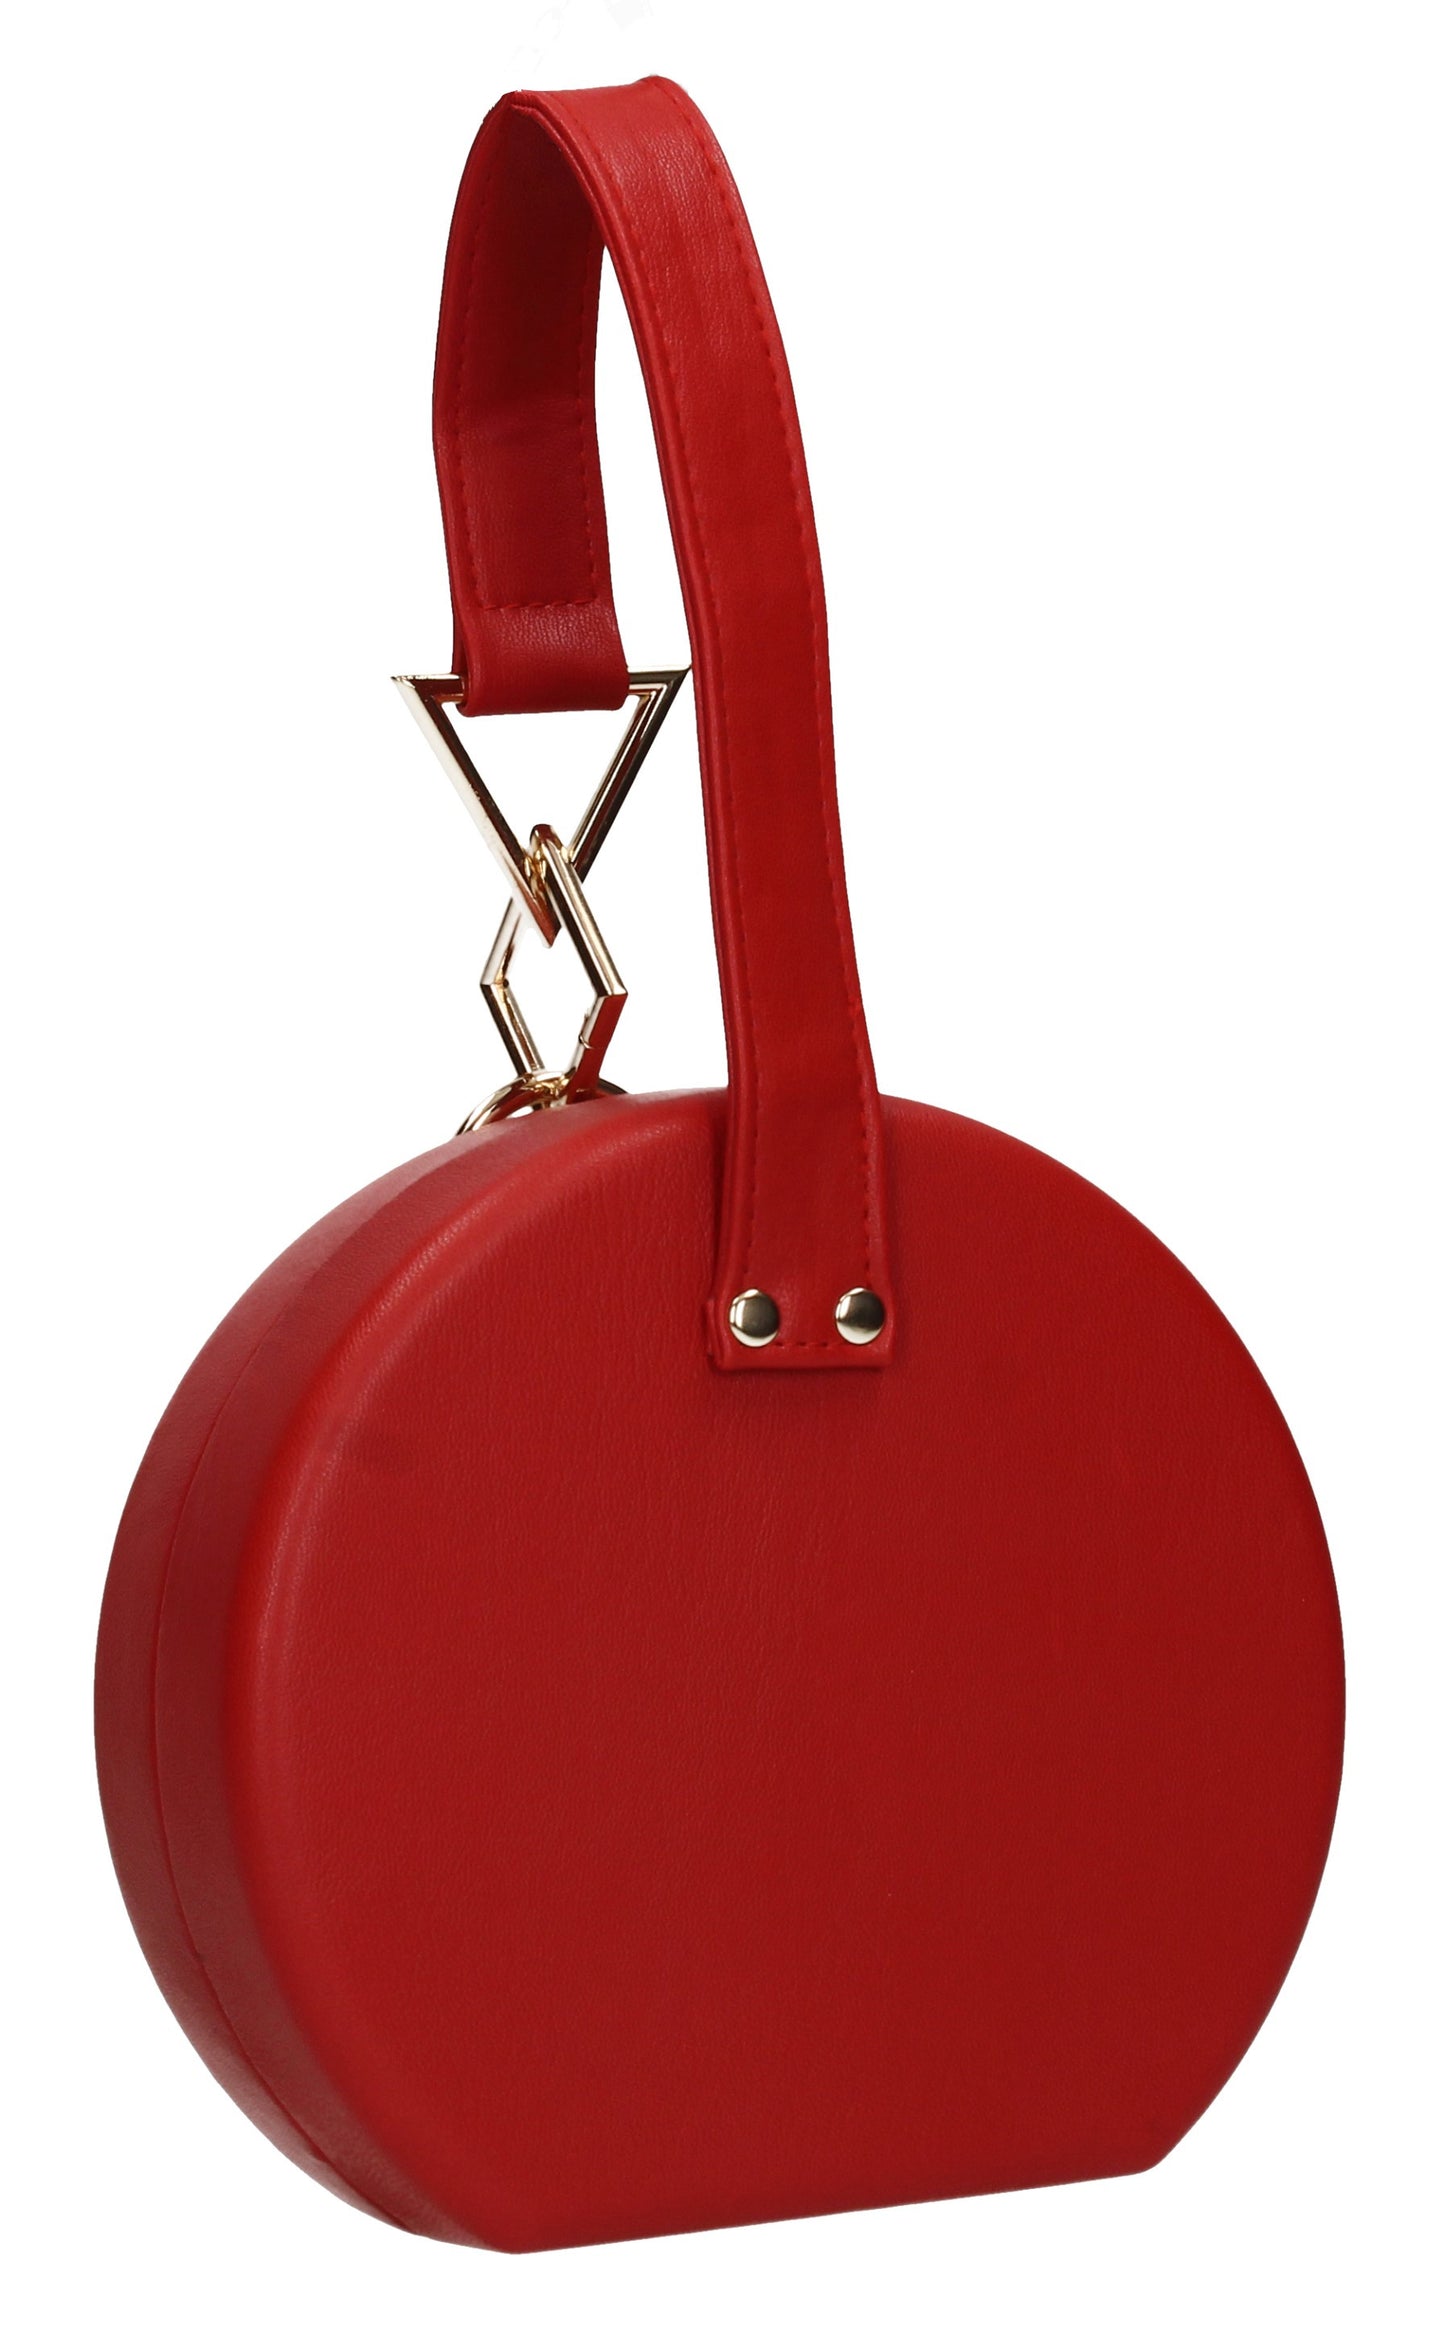 Rayne Circular Style Faux Leather Clutch Bag Red